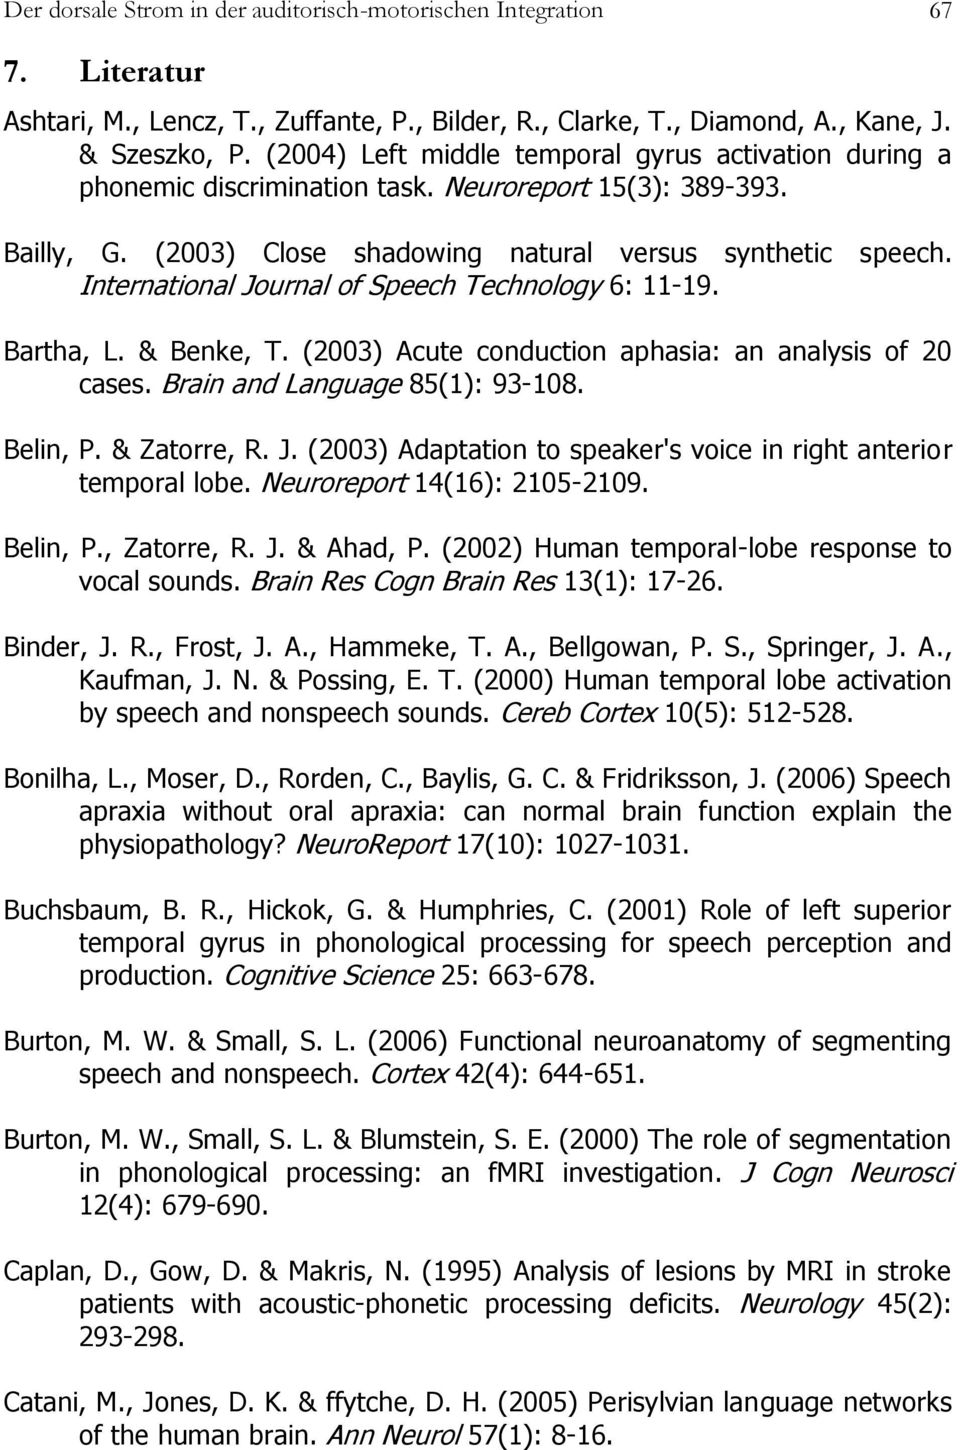 International Journal of Speech Technology 6: 11-19. Bartha, L. & Benke, T. (2003) Acute conduction aphasia: an analysis of 20 cases. Brain and Language 85(1): 93-108. Belin, P. & Zatorre, R. J. (2003) Adaptation to speaker's voice in right anterior temporal lobe.